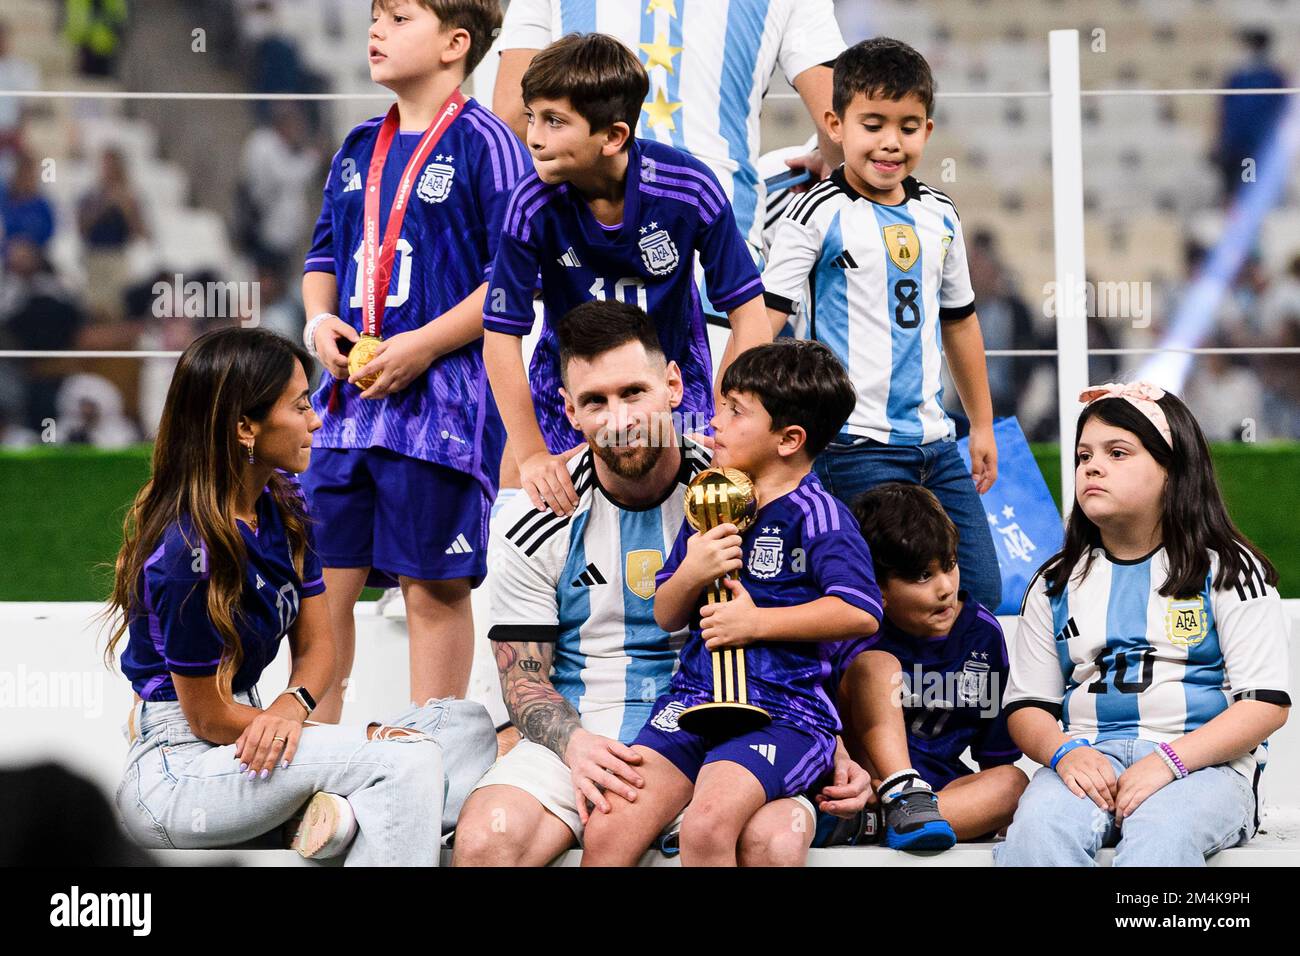 Lusail, Qatar. 18th Dec, 2022. Lusail Stadium Lionel Messi of Argentina with family after Argentina won the 2022 FIFA World Cup after winning a penalty shootout after the match between Argentina x France ended in a 3-3 draw valid for the 2022 FIFA World Cup final held at the Lusail International Stadium, AD, Qatar (Marcio Machado/SPP) Credit: SPP Sport Press Photo. /Alamy Live News Stock Photo